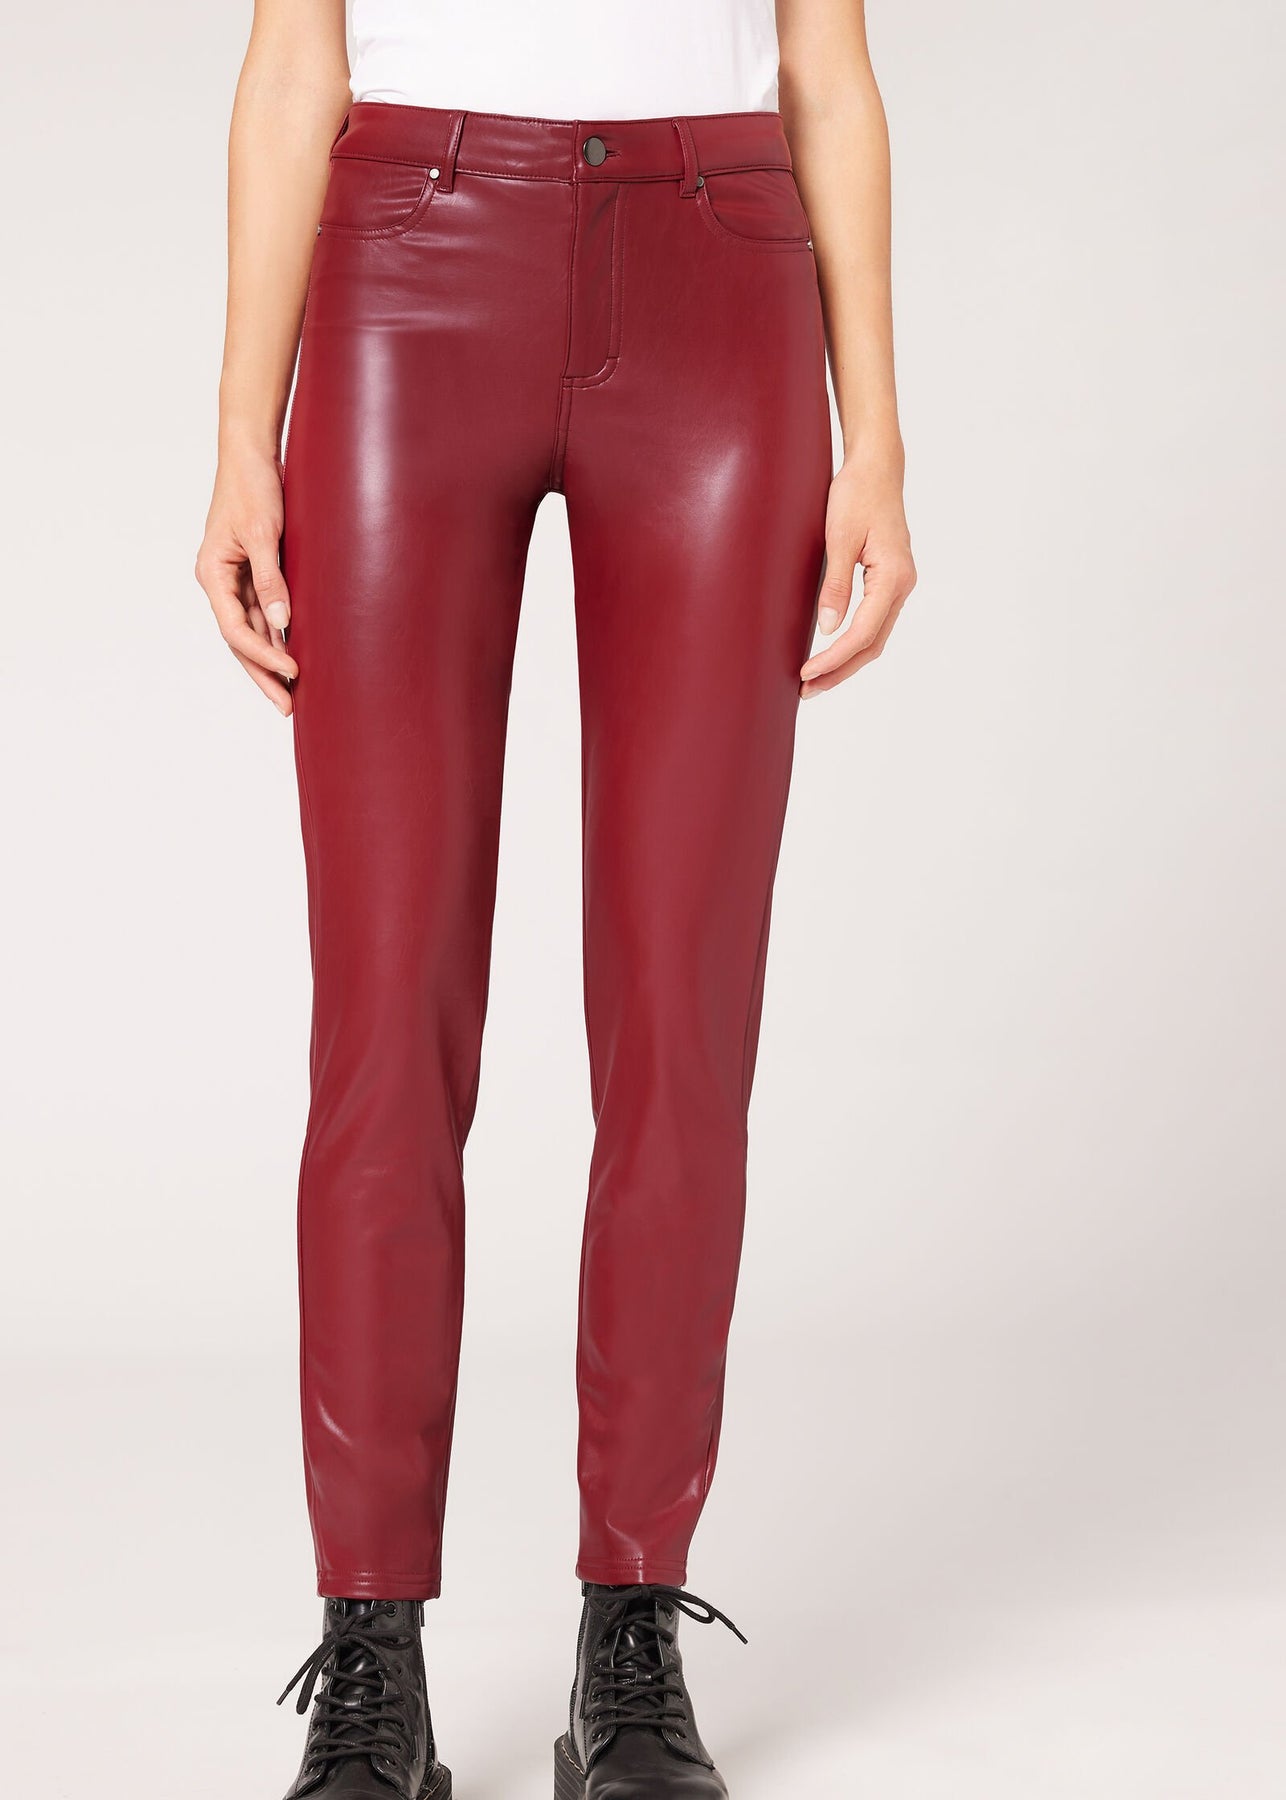 CALZEDONIA Thermal Leather Effect Leggings  Leather, Leggings are not  pants, Calzedonia